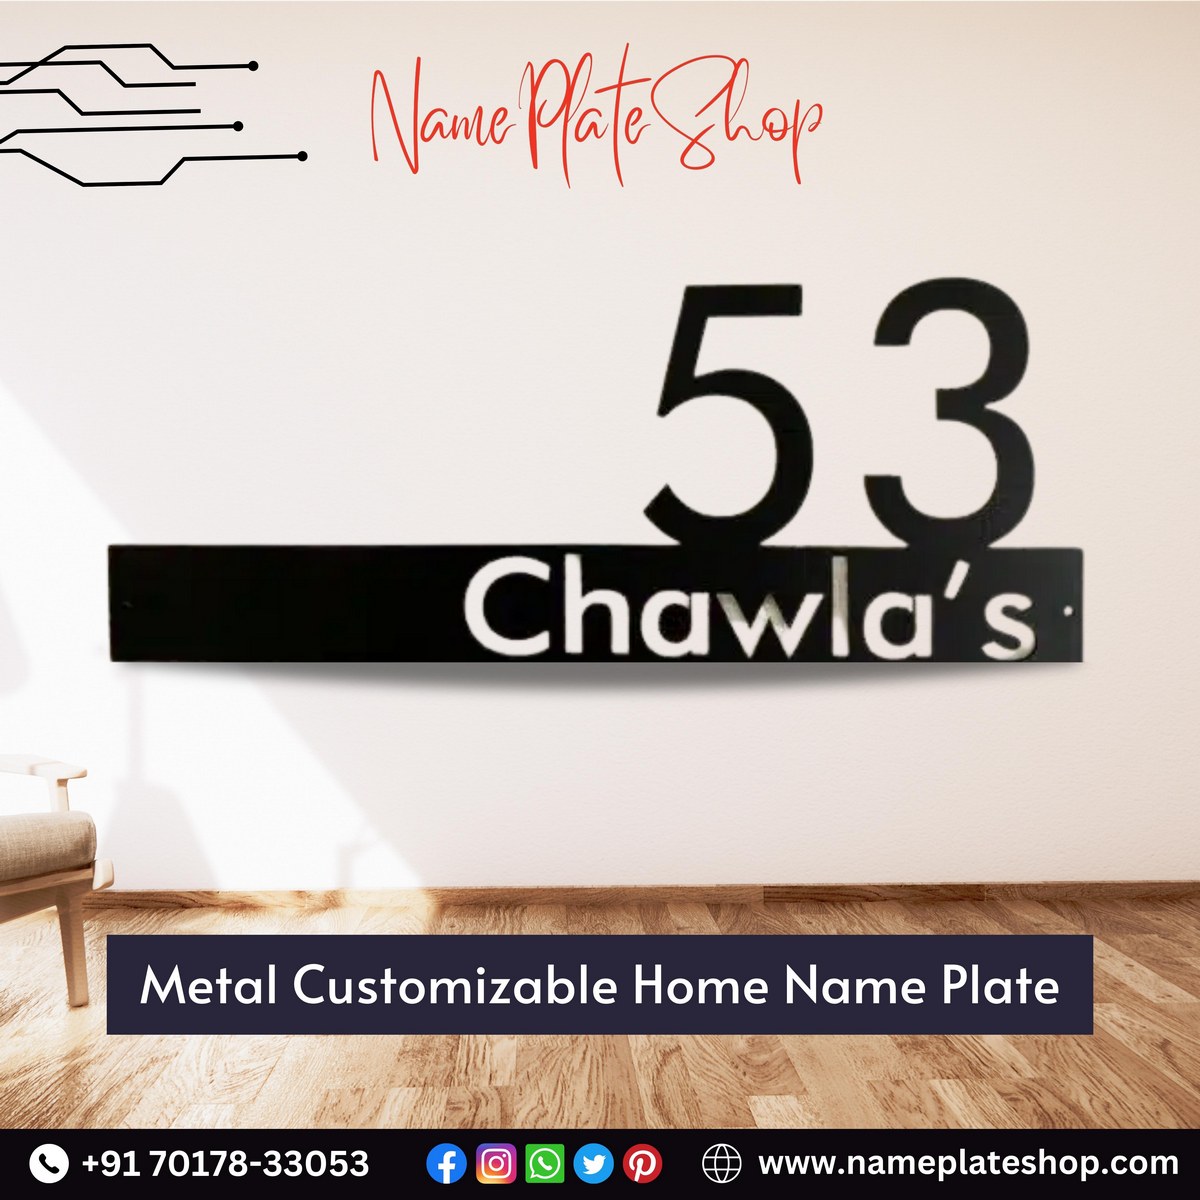 New Custamizable Metal Home Name Plate Decor With Style